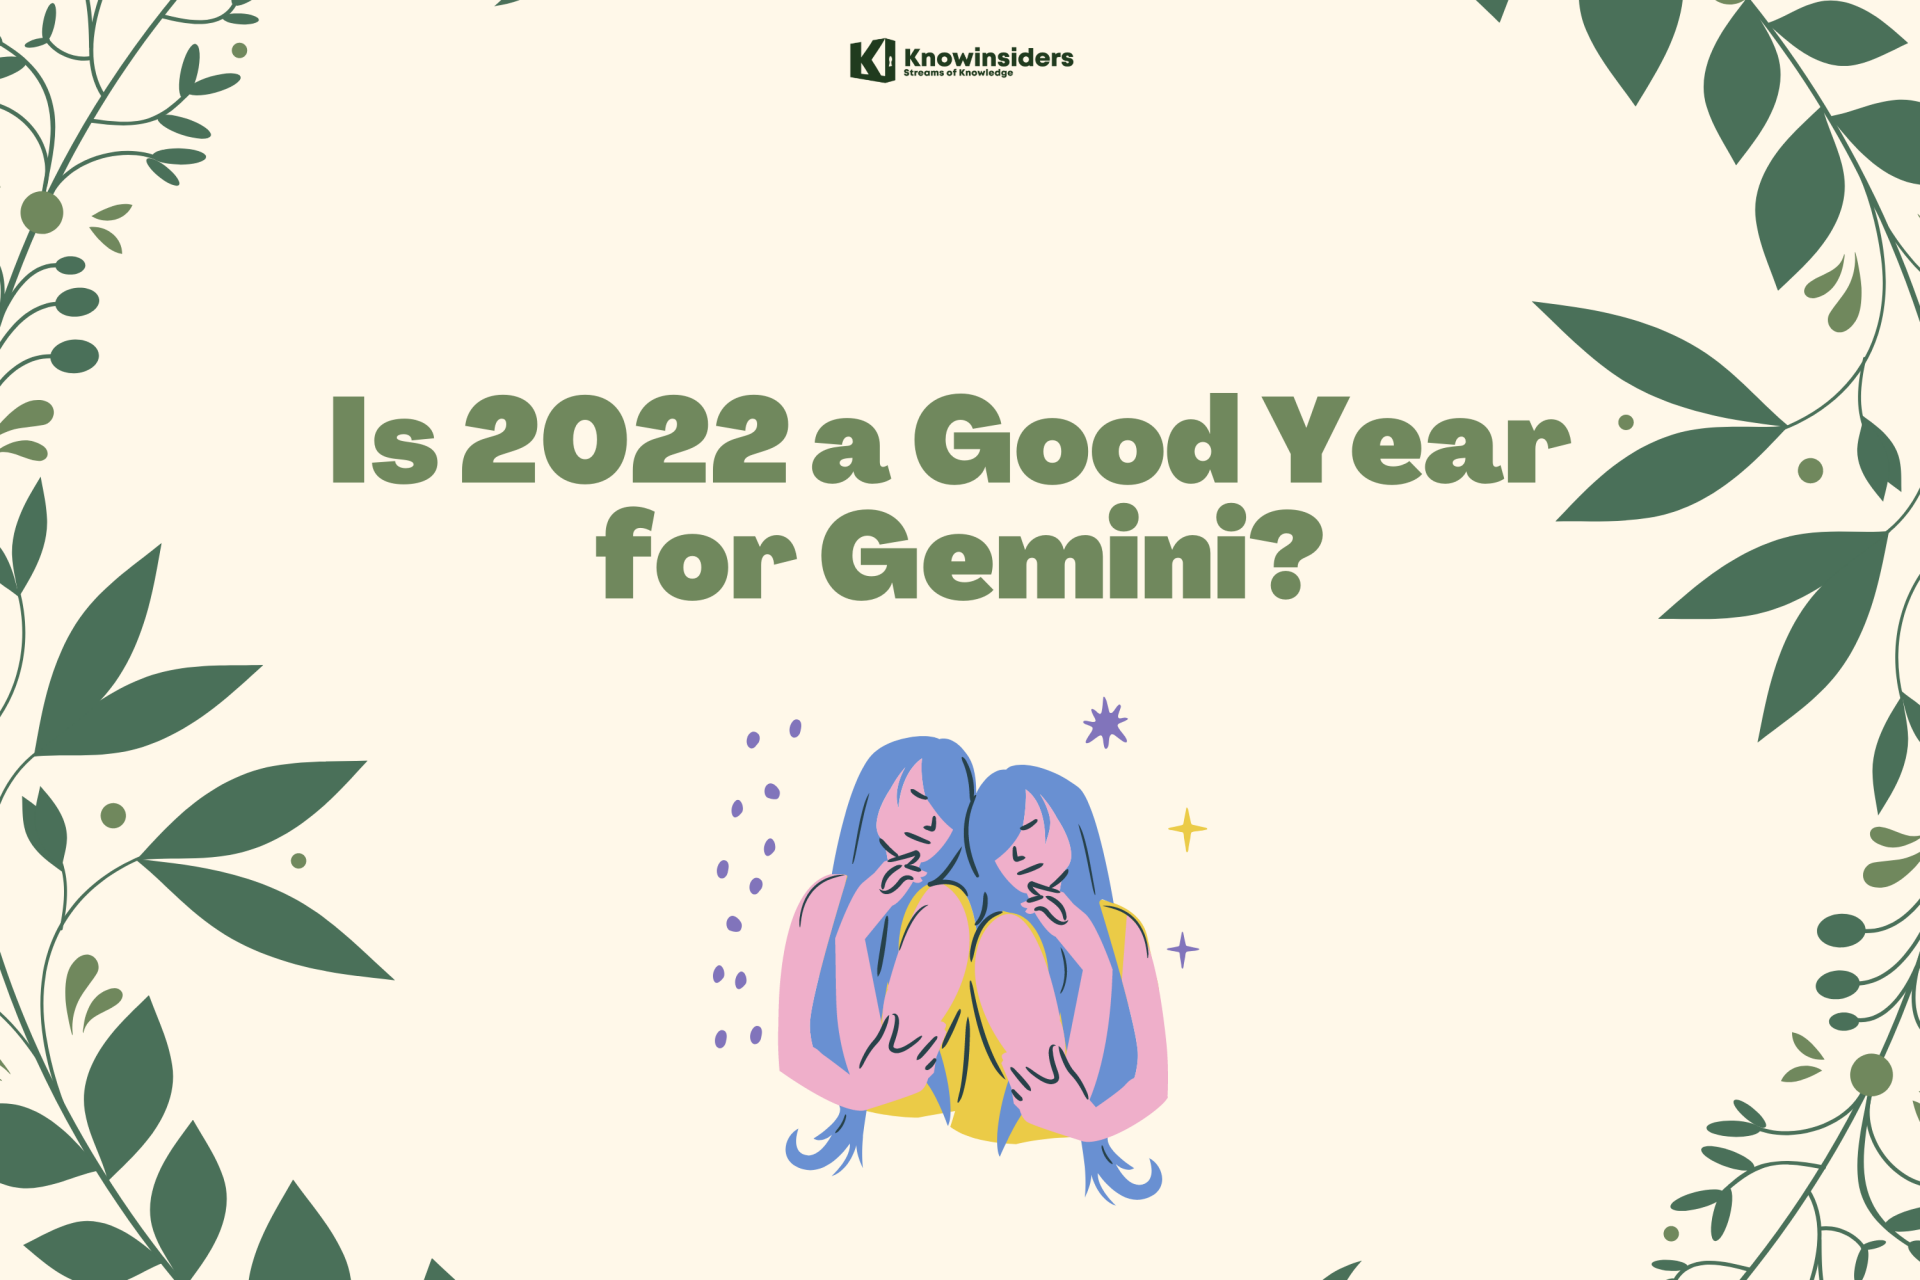 Is 2022 a Good Year for Gemini?